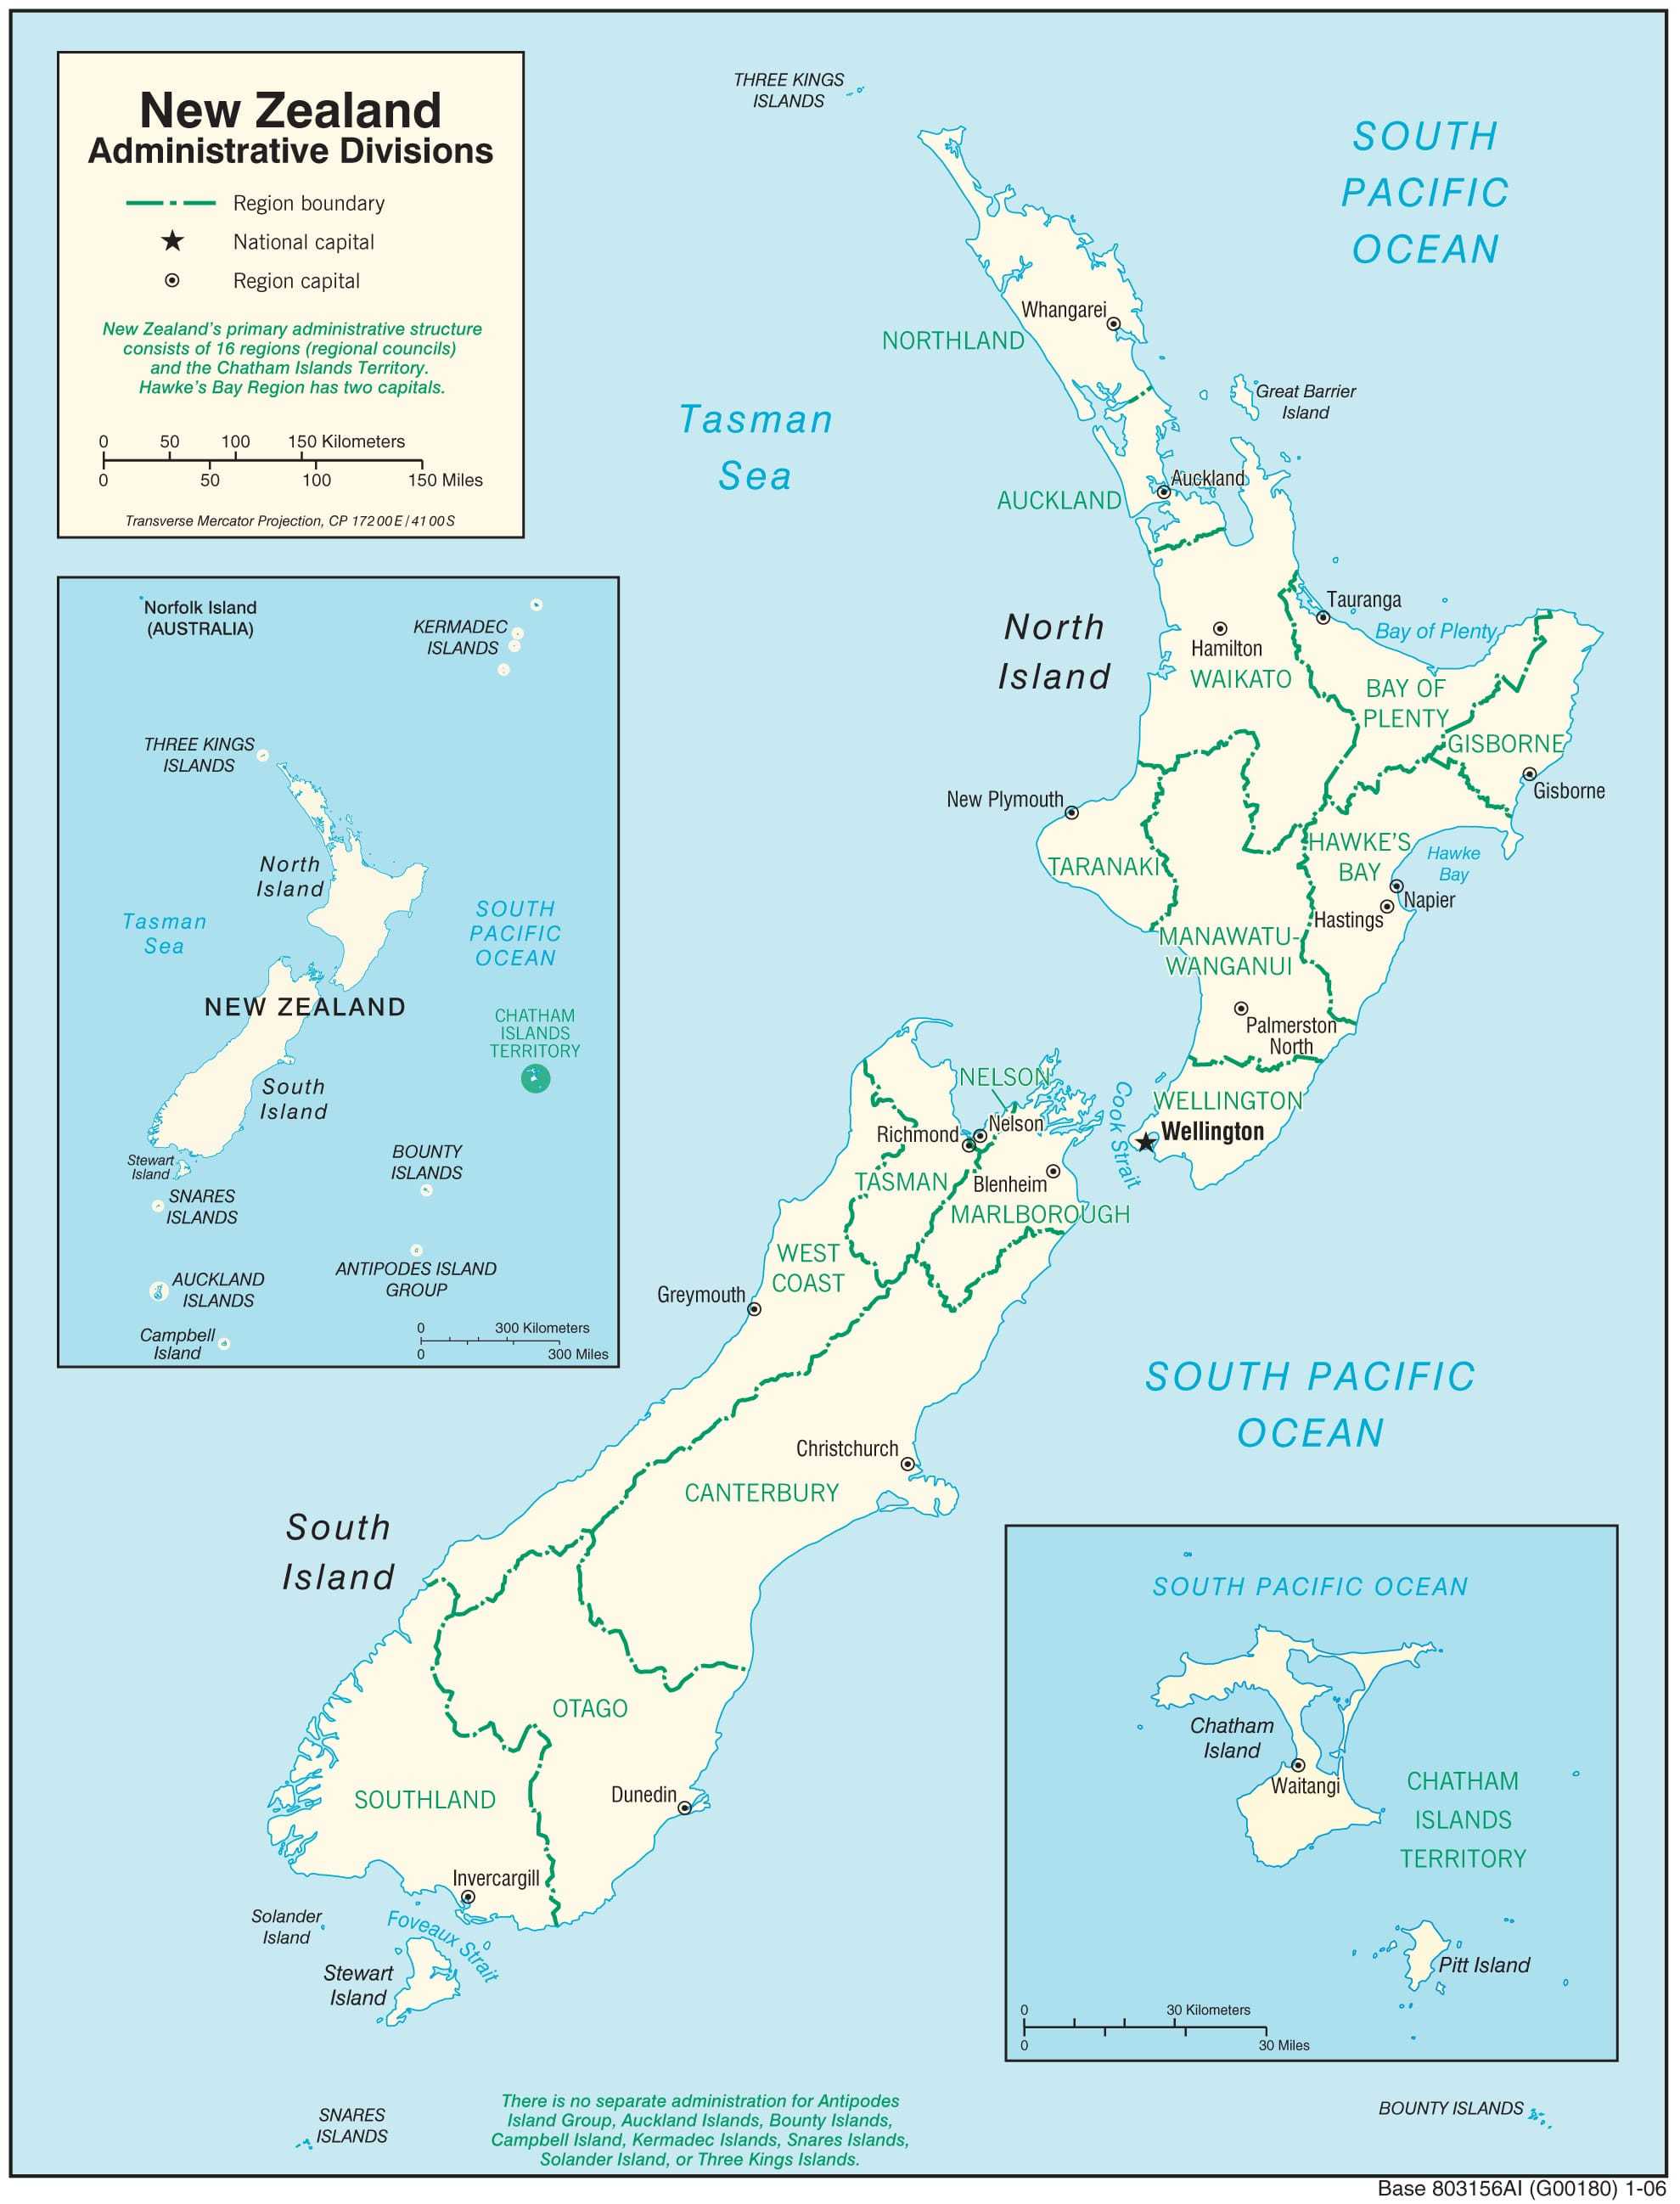 Administration map of New Zealand.